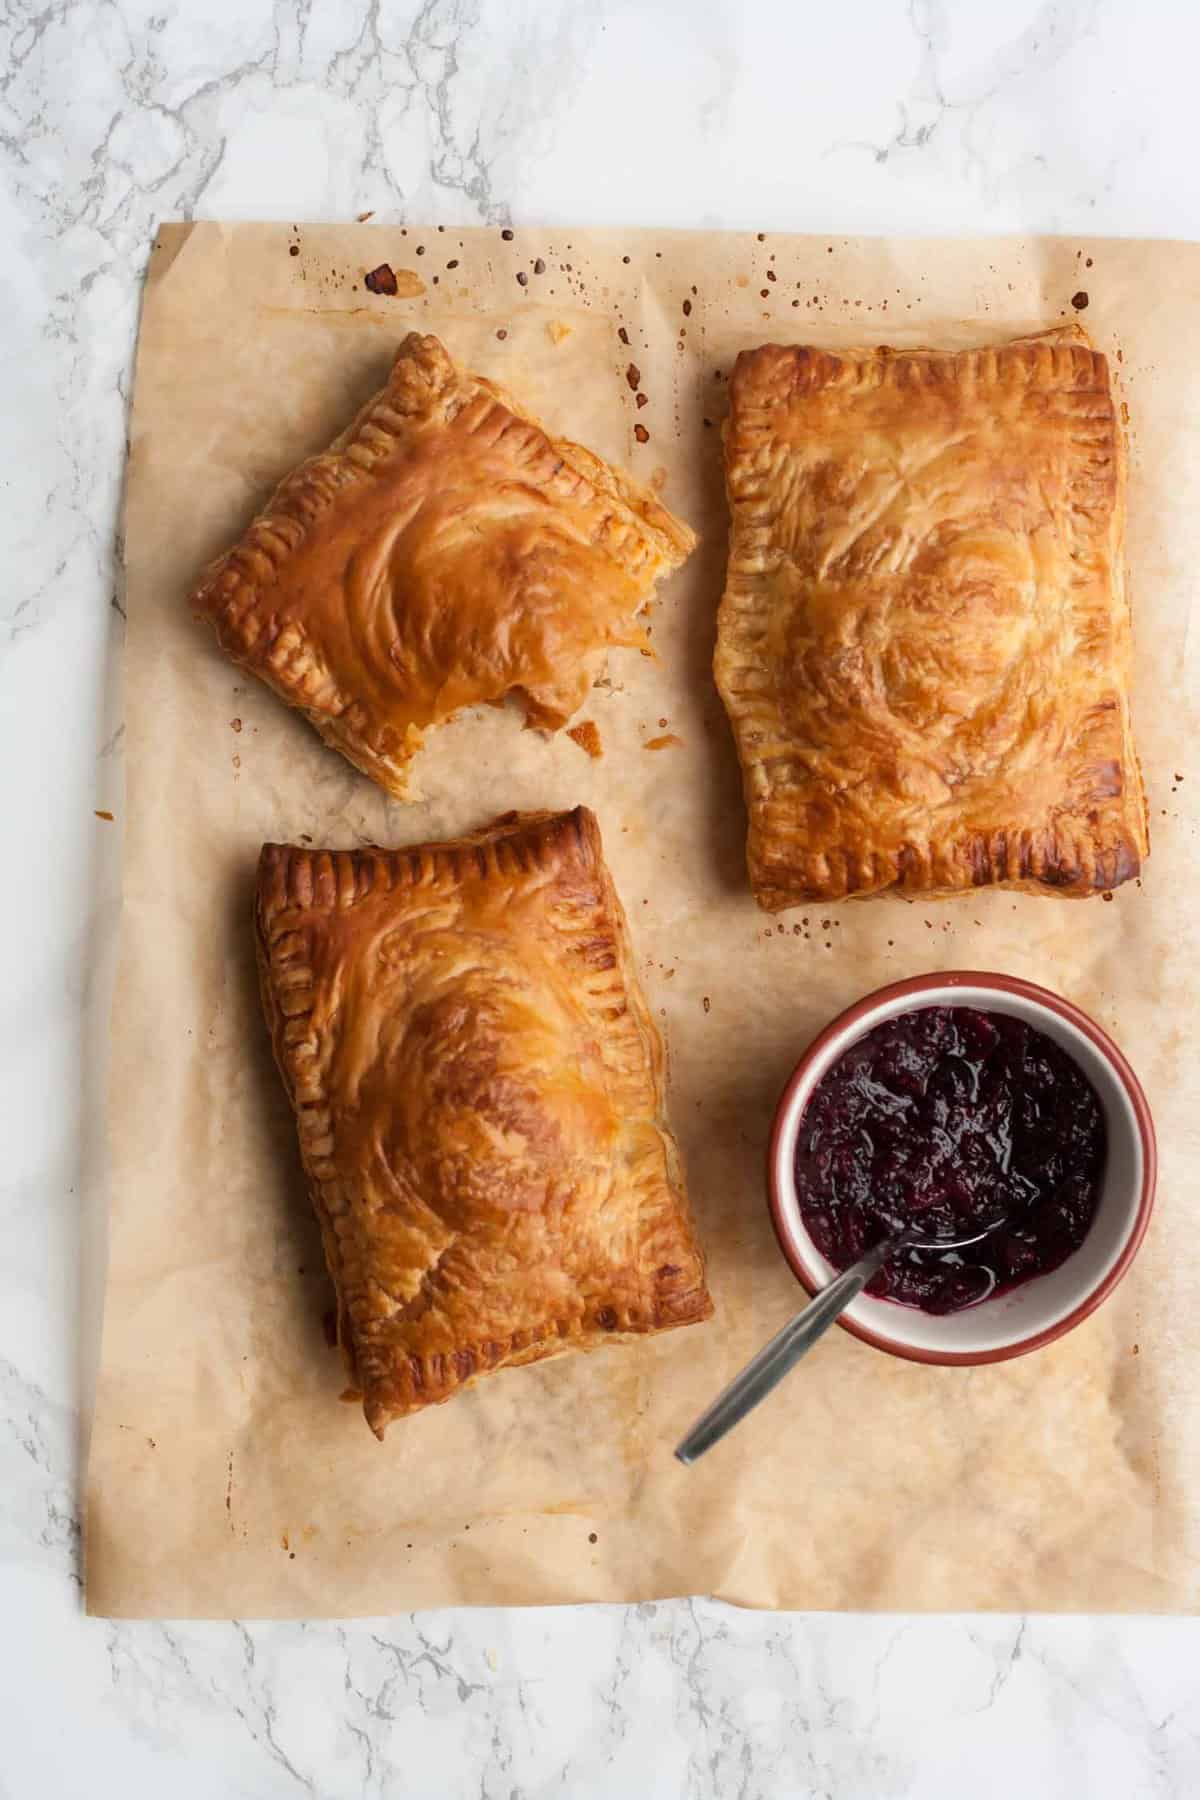 three turkey pastries on parchment with a bowl of cranberry sauce and a bite taken from a pastry.